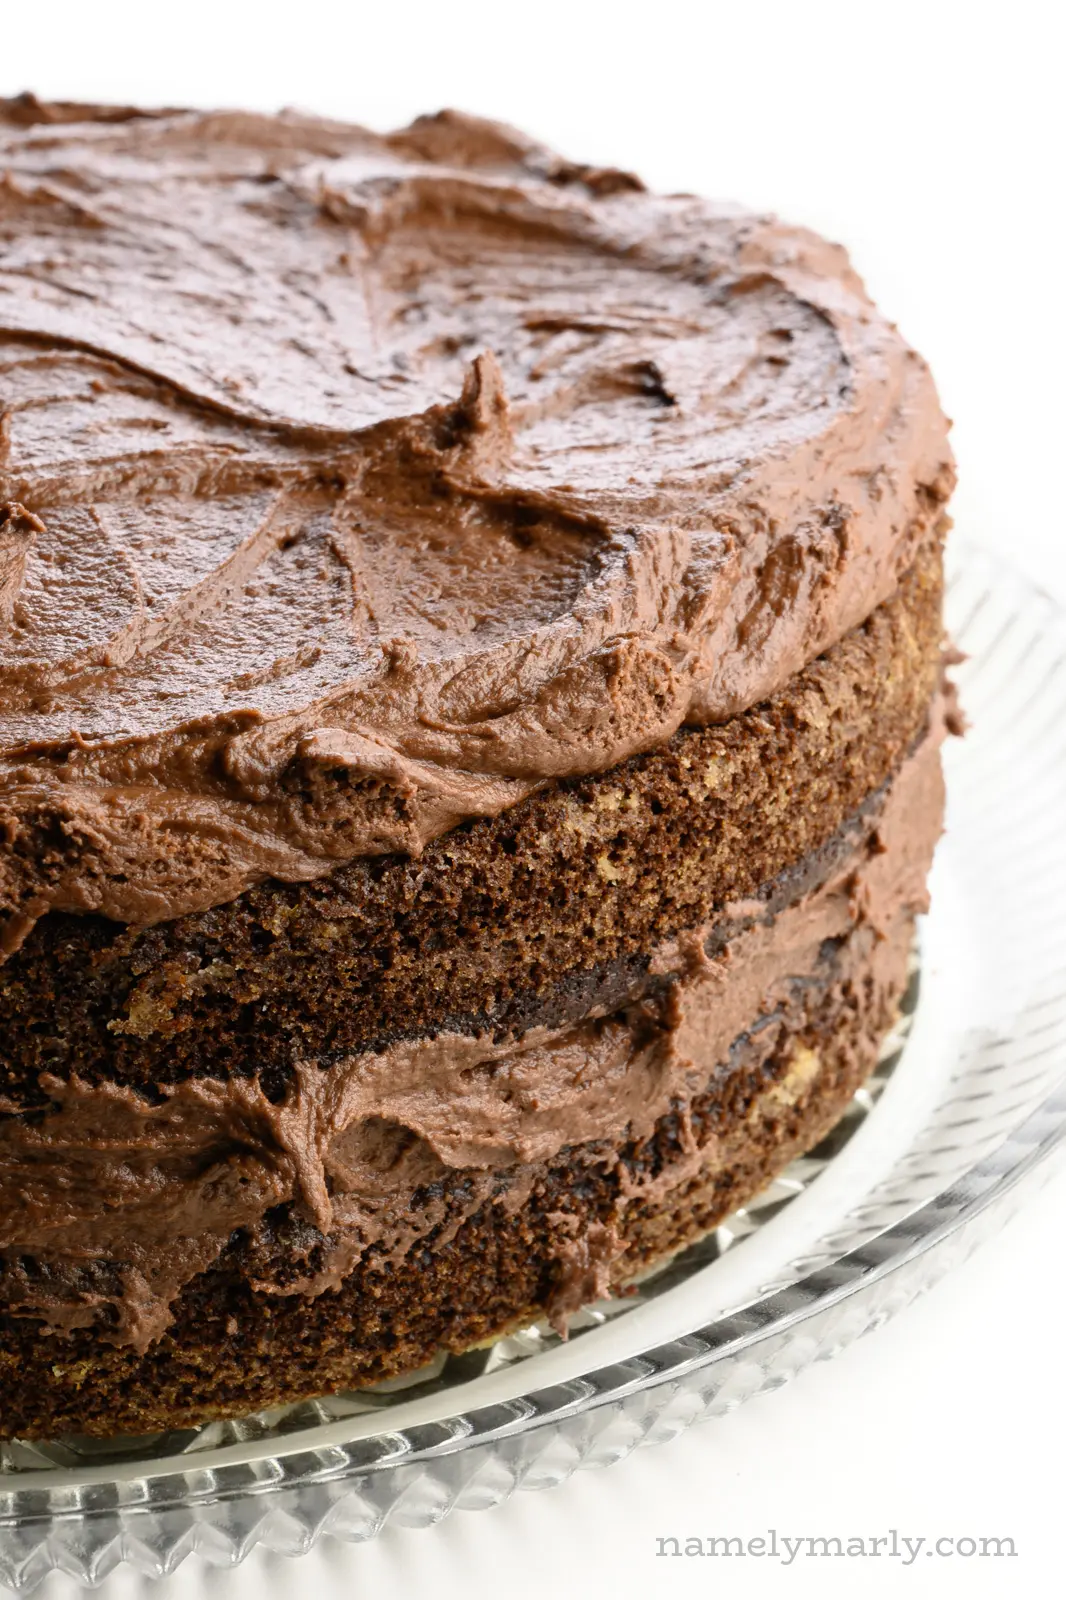 A chocolate cake has frosting on the top and between the two layers, but no frosting on the sides.